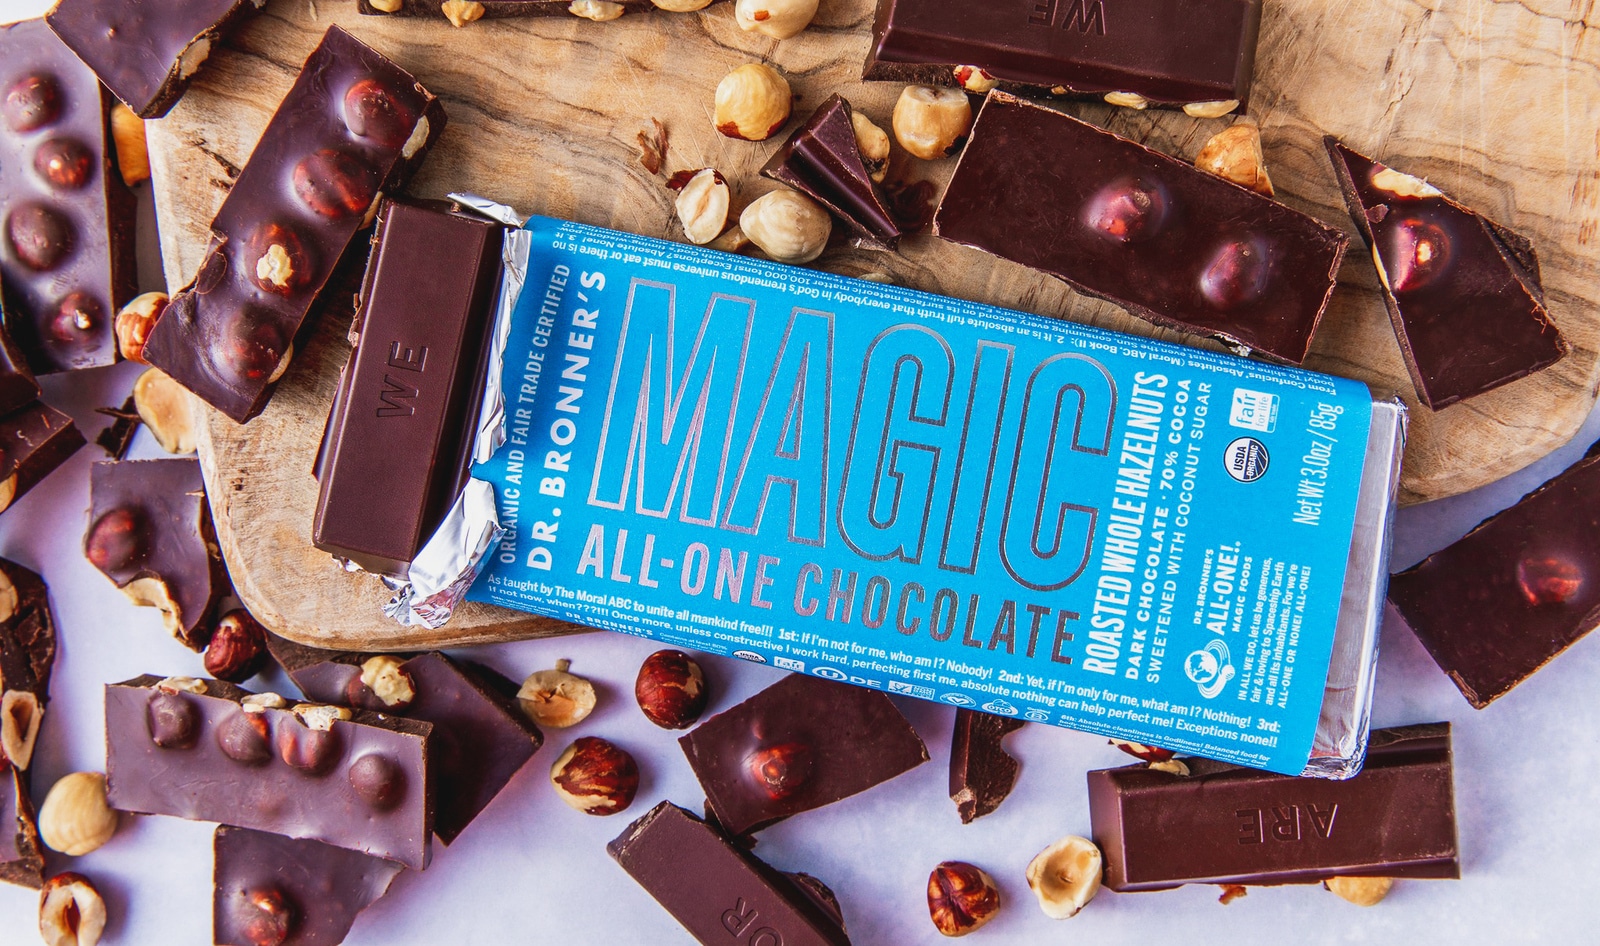 Dr. Bronner's Makes Vegan Chocolate Like It Makes Soap: Sustainably